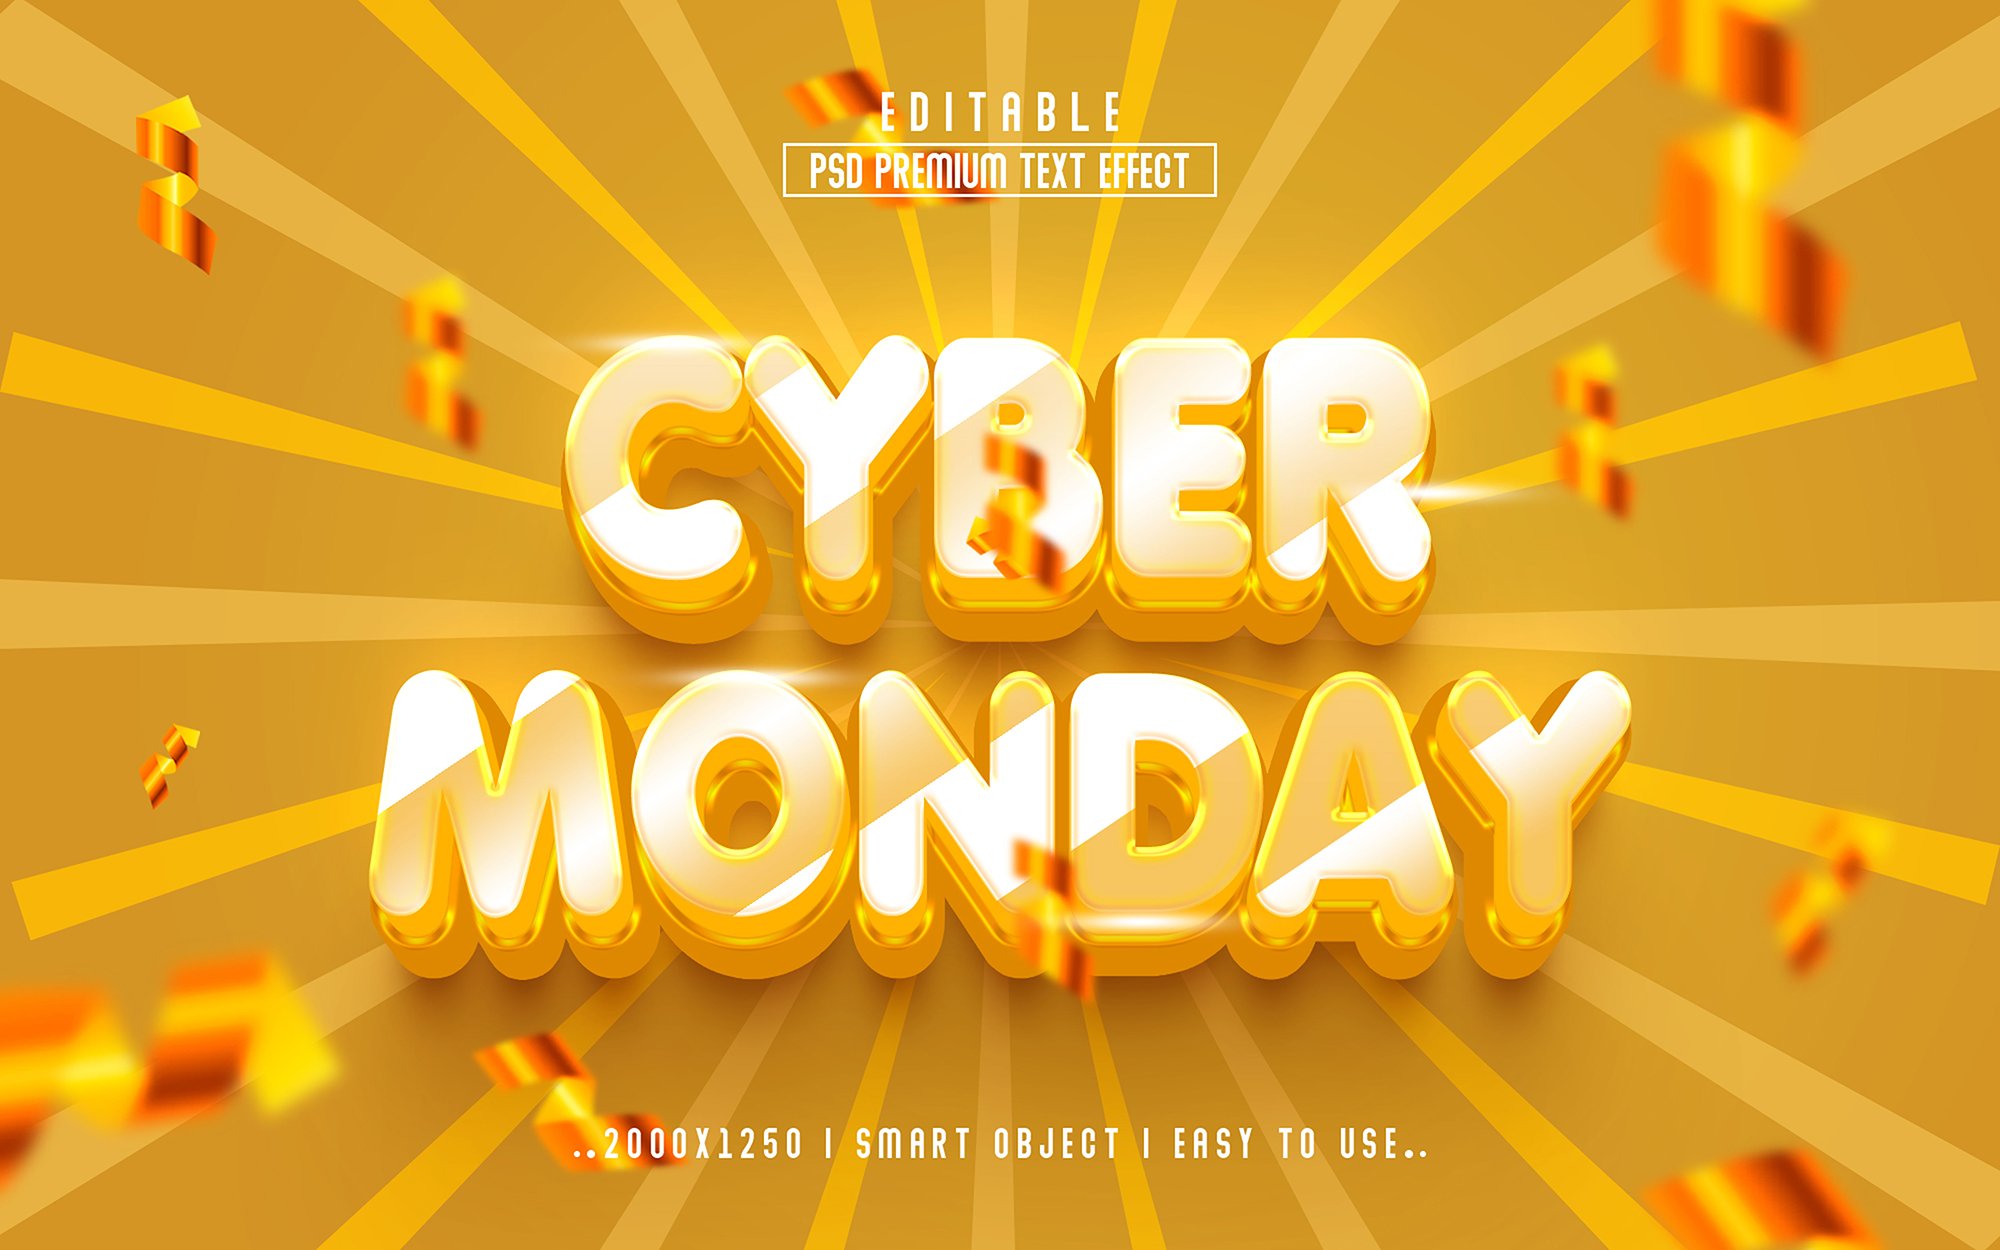 Cyber Monday 3D Editable Text Effectcover image.